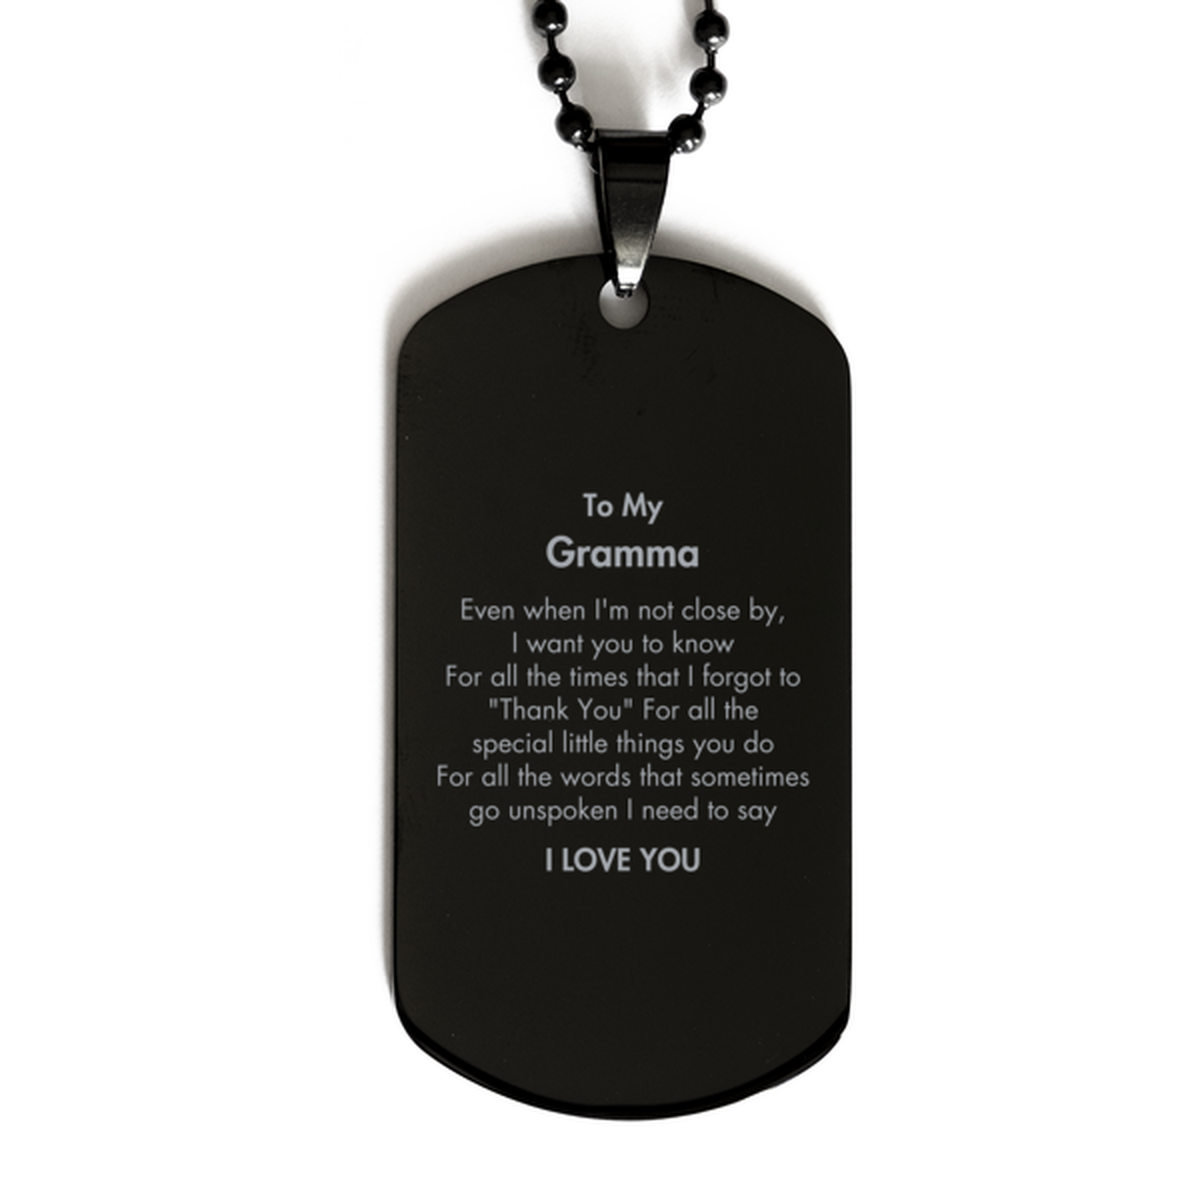 Thank You Gifts for Gramma, Keepsake Black Dog Tag Gifts for Gramma Birthday Mother's day Father's Day Gramma For all the words That sometimes go unspoken I need to say I LOVE YOU